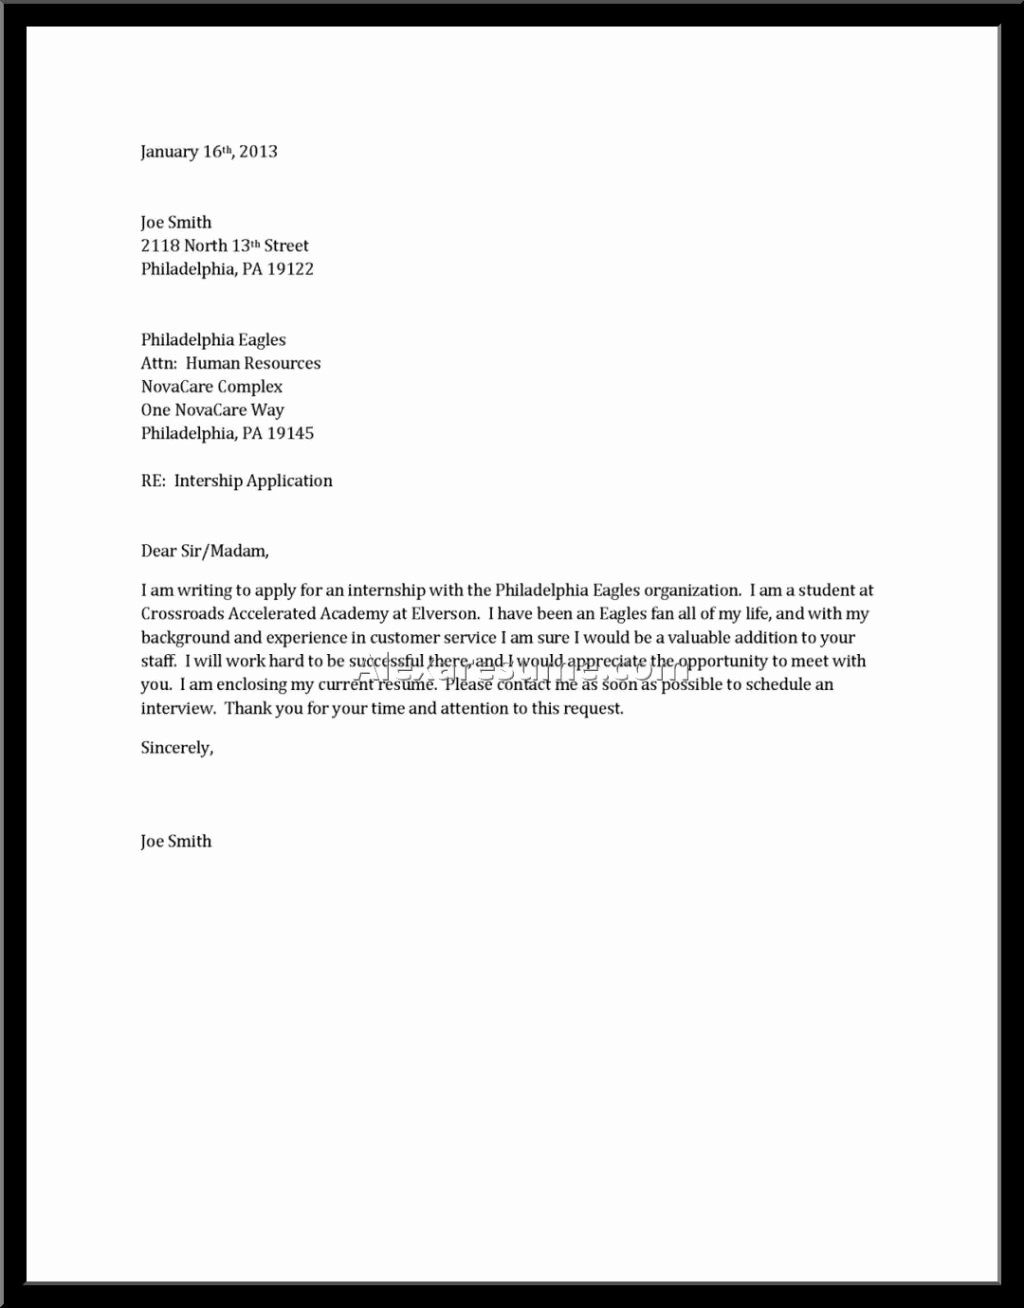 Resume and Cover Letter formats Inspirational Best General Cover Letter for Resume – Letter format Writing